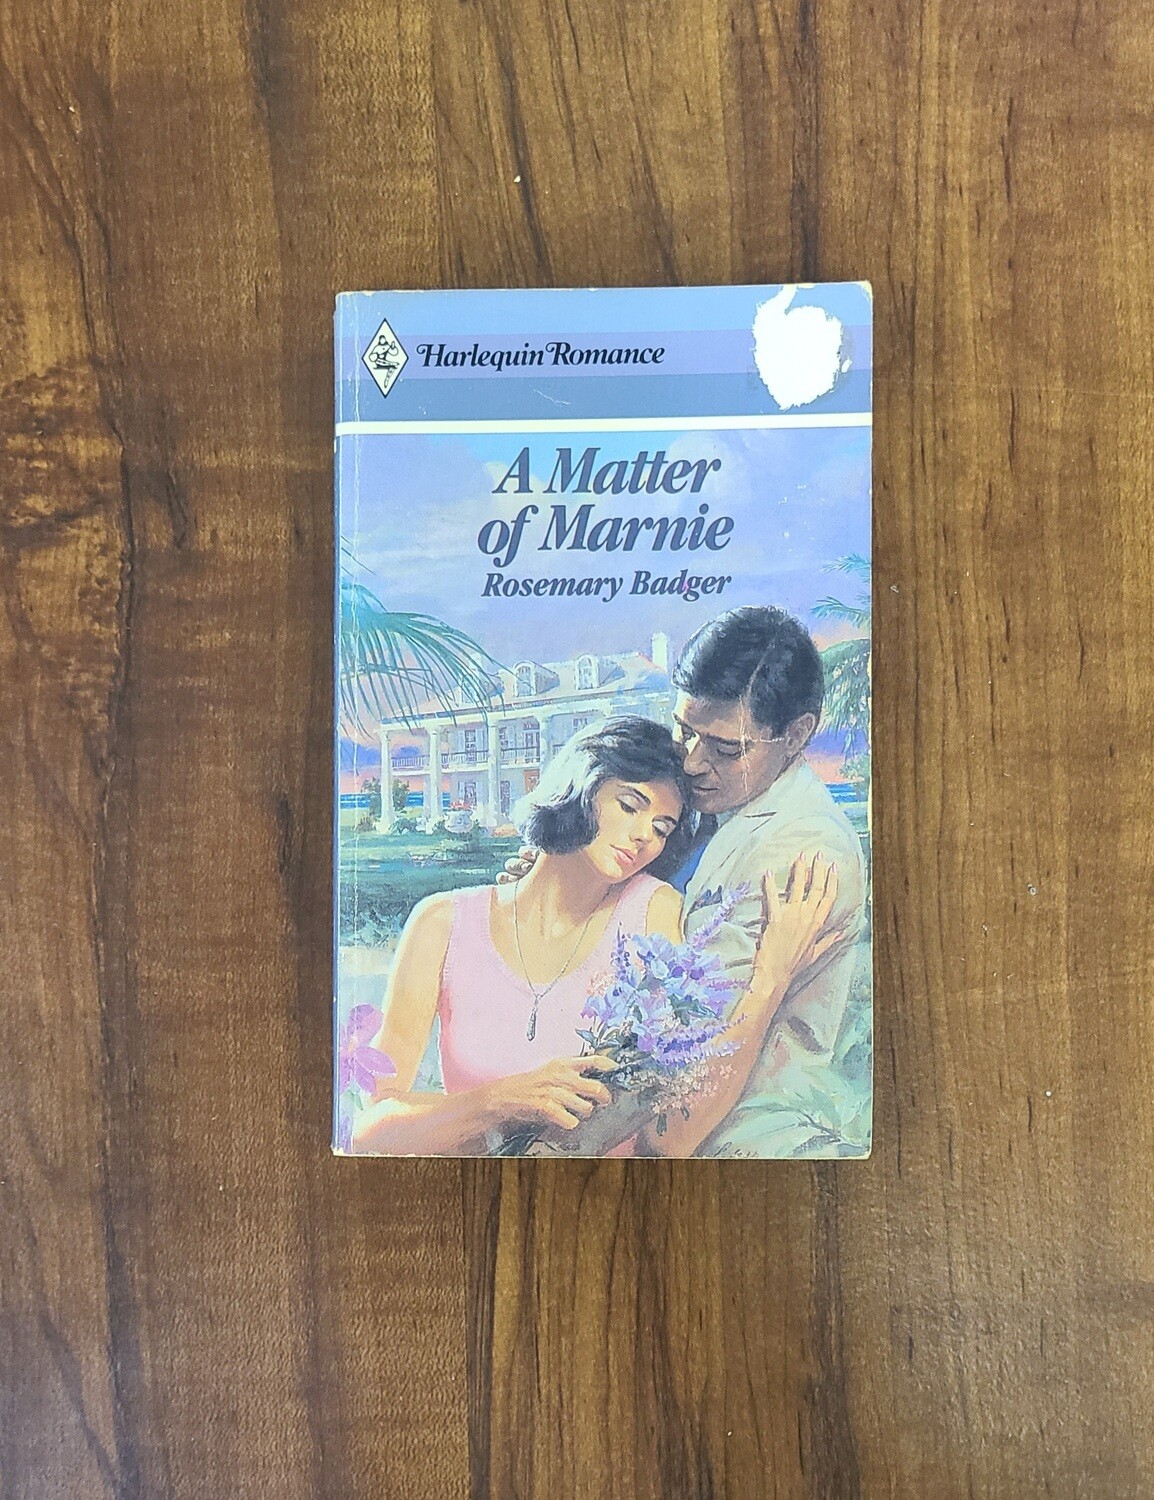 A Matter of Marnie by Rosemary Badger